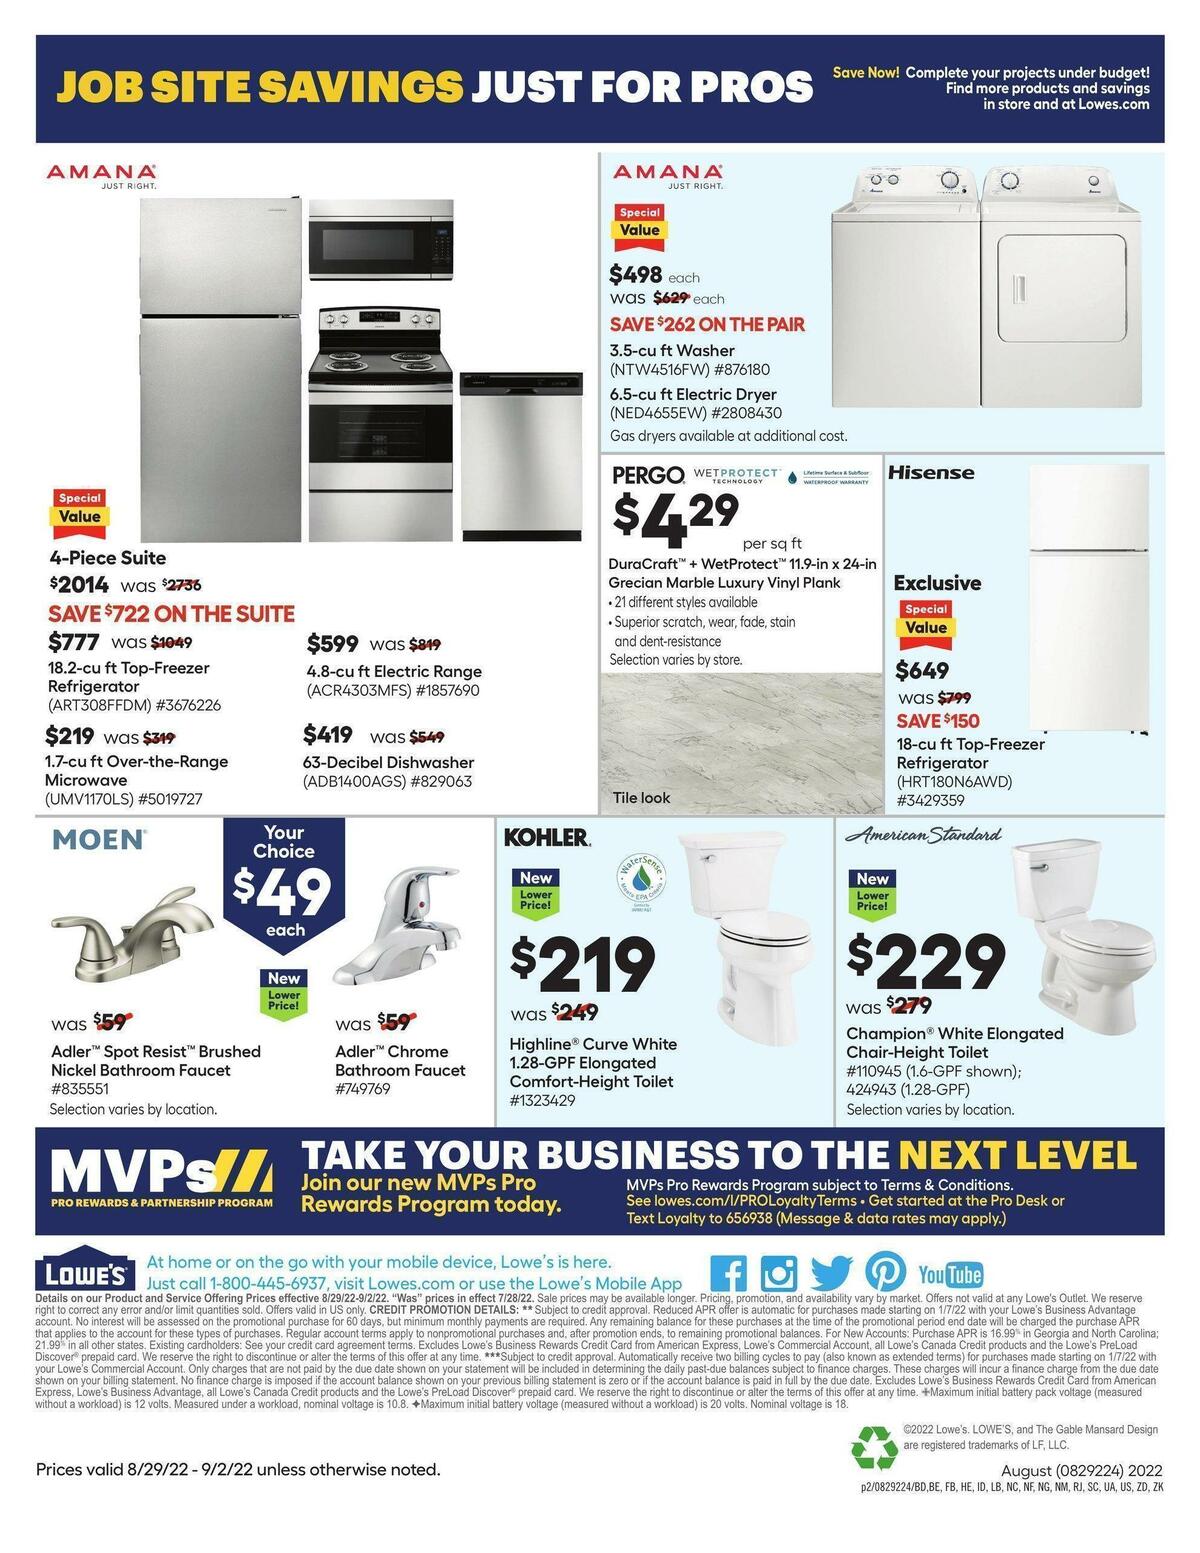 Lowe's Pro Ad Weekly Ad from August 29